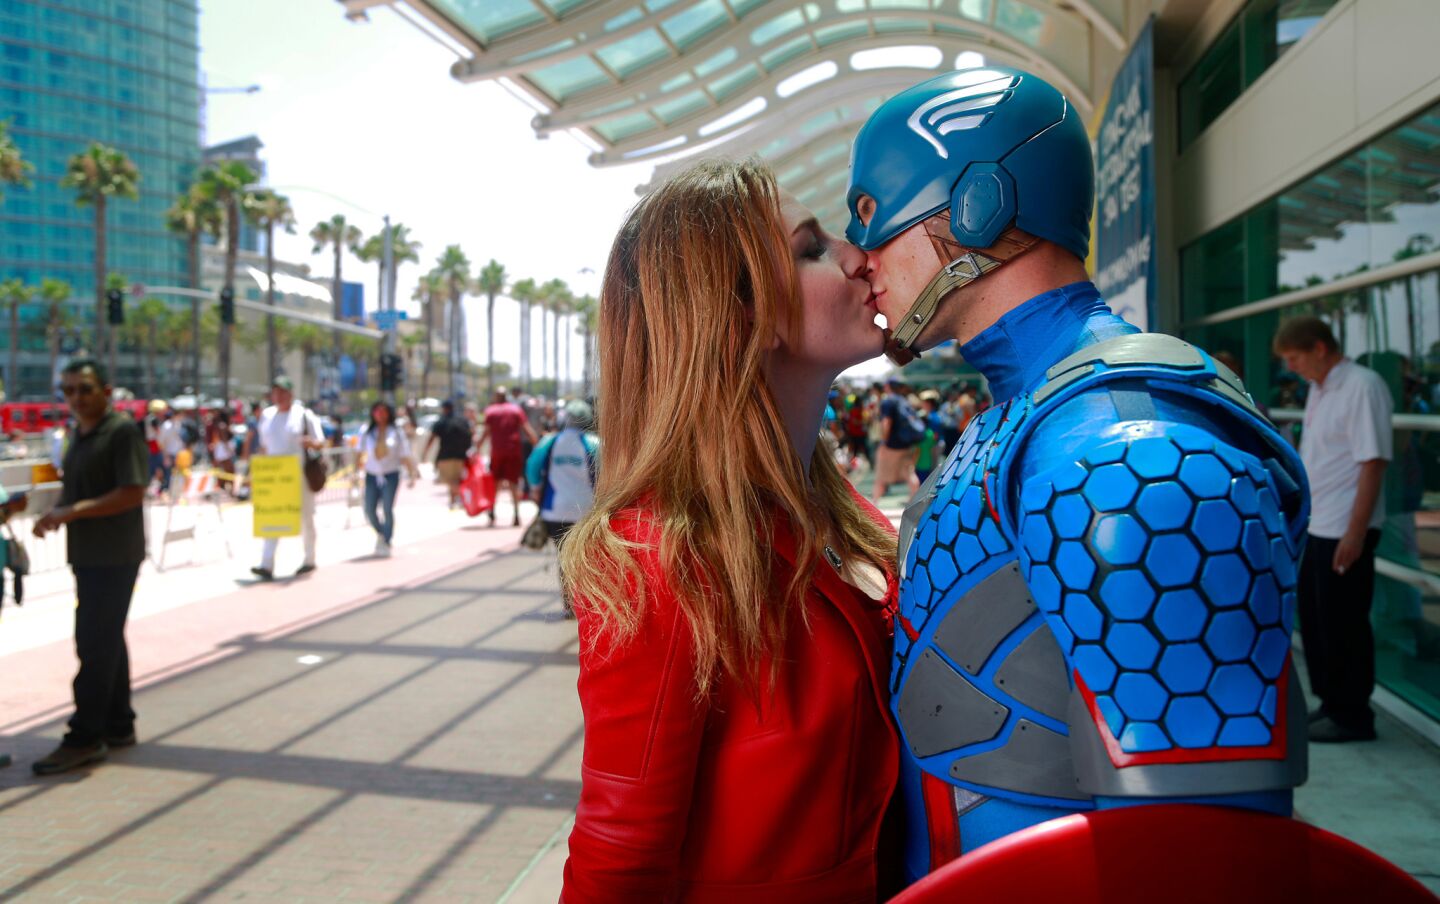 Kelsey Endter of Lake Tahoe and boyfriend Matt Mullis of San Diego dressed as Scarlet Witch and Captain America at Comic-Con in San Diego on July 20.